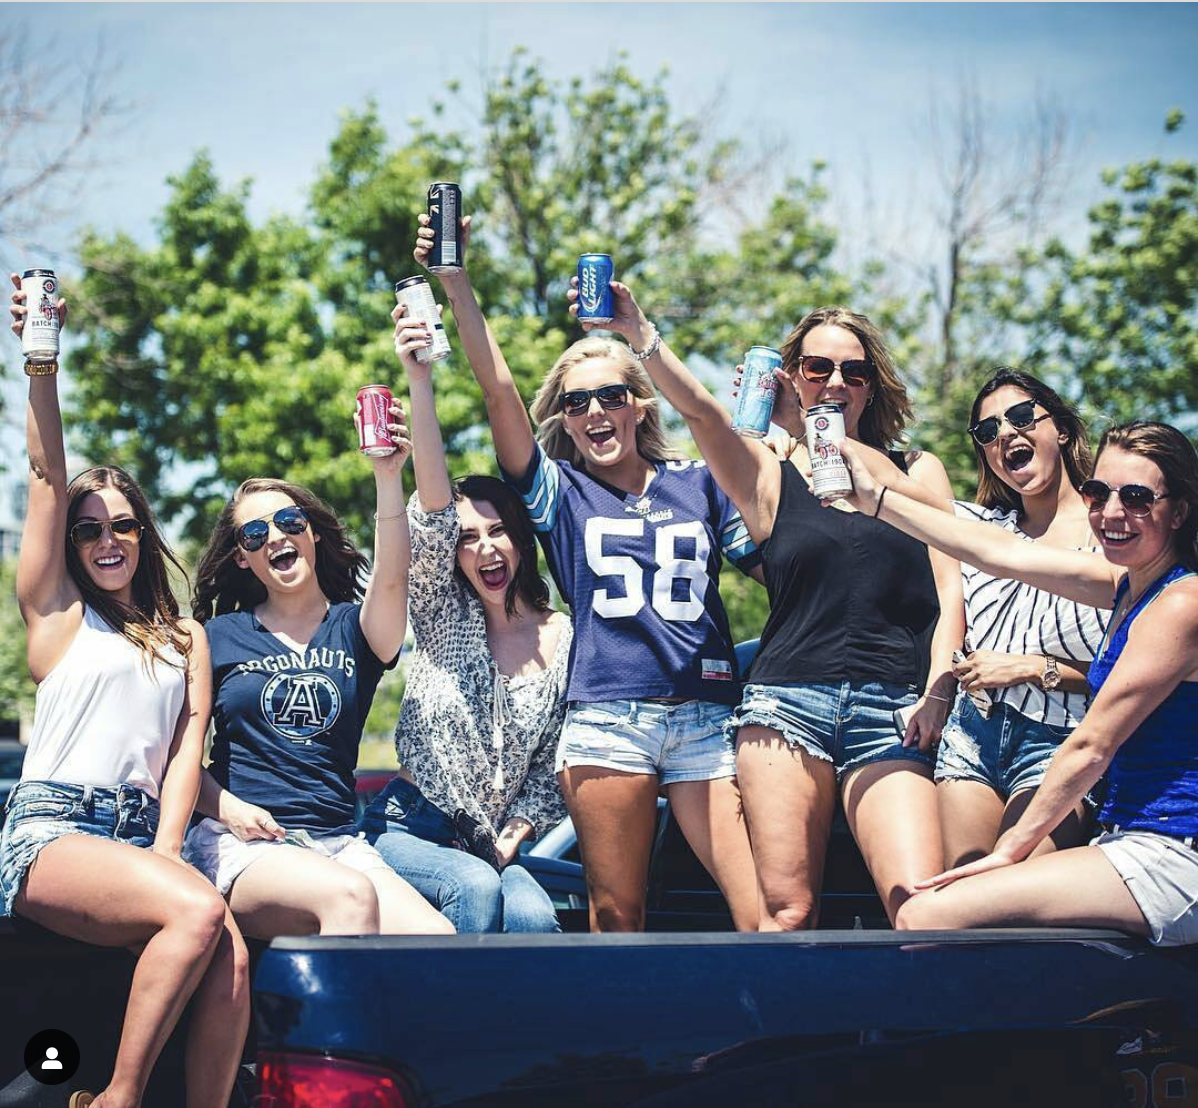 Group of women at tailgating